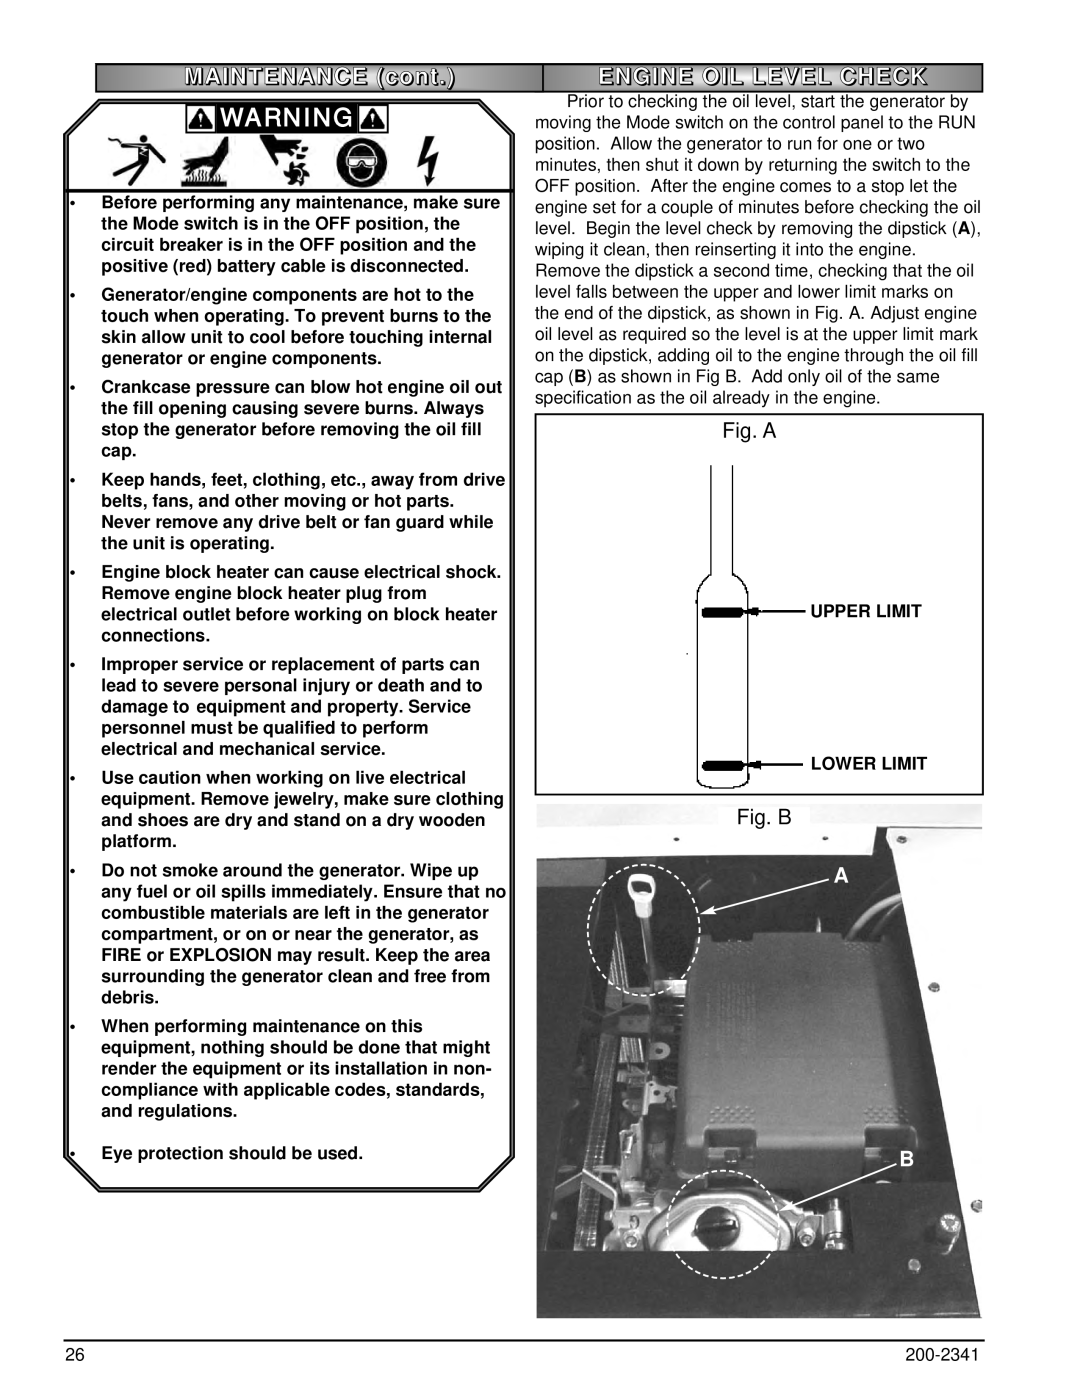 Powermate PM400911 owner manual MAINTENANCE cont, Engine Oil Level Check, Fig. B 